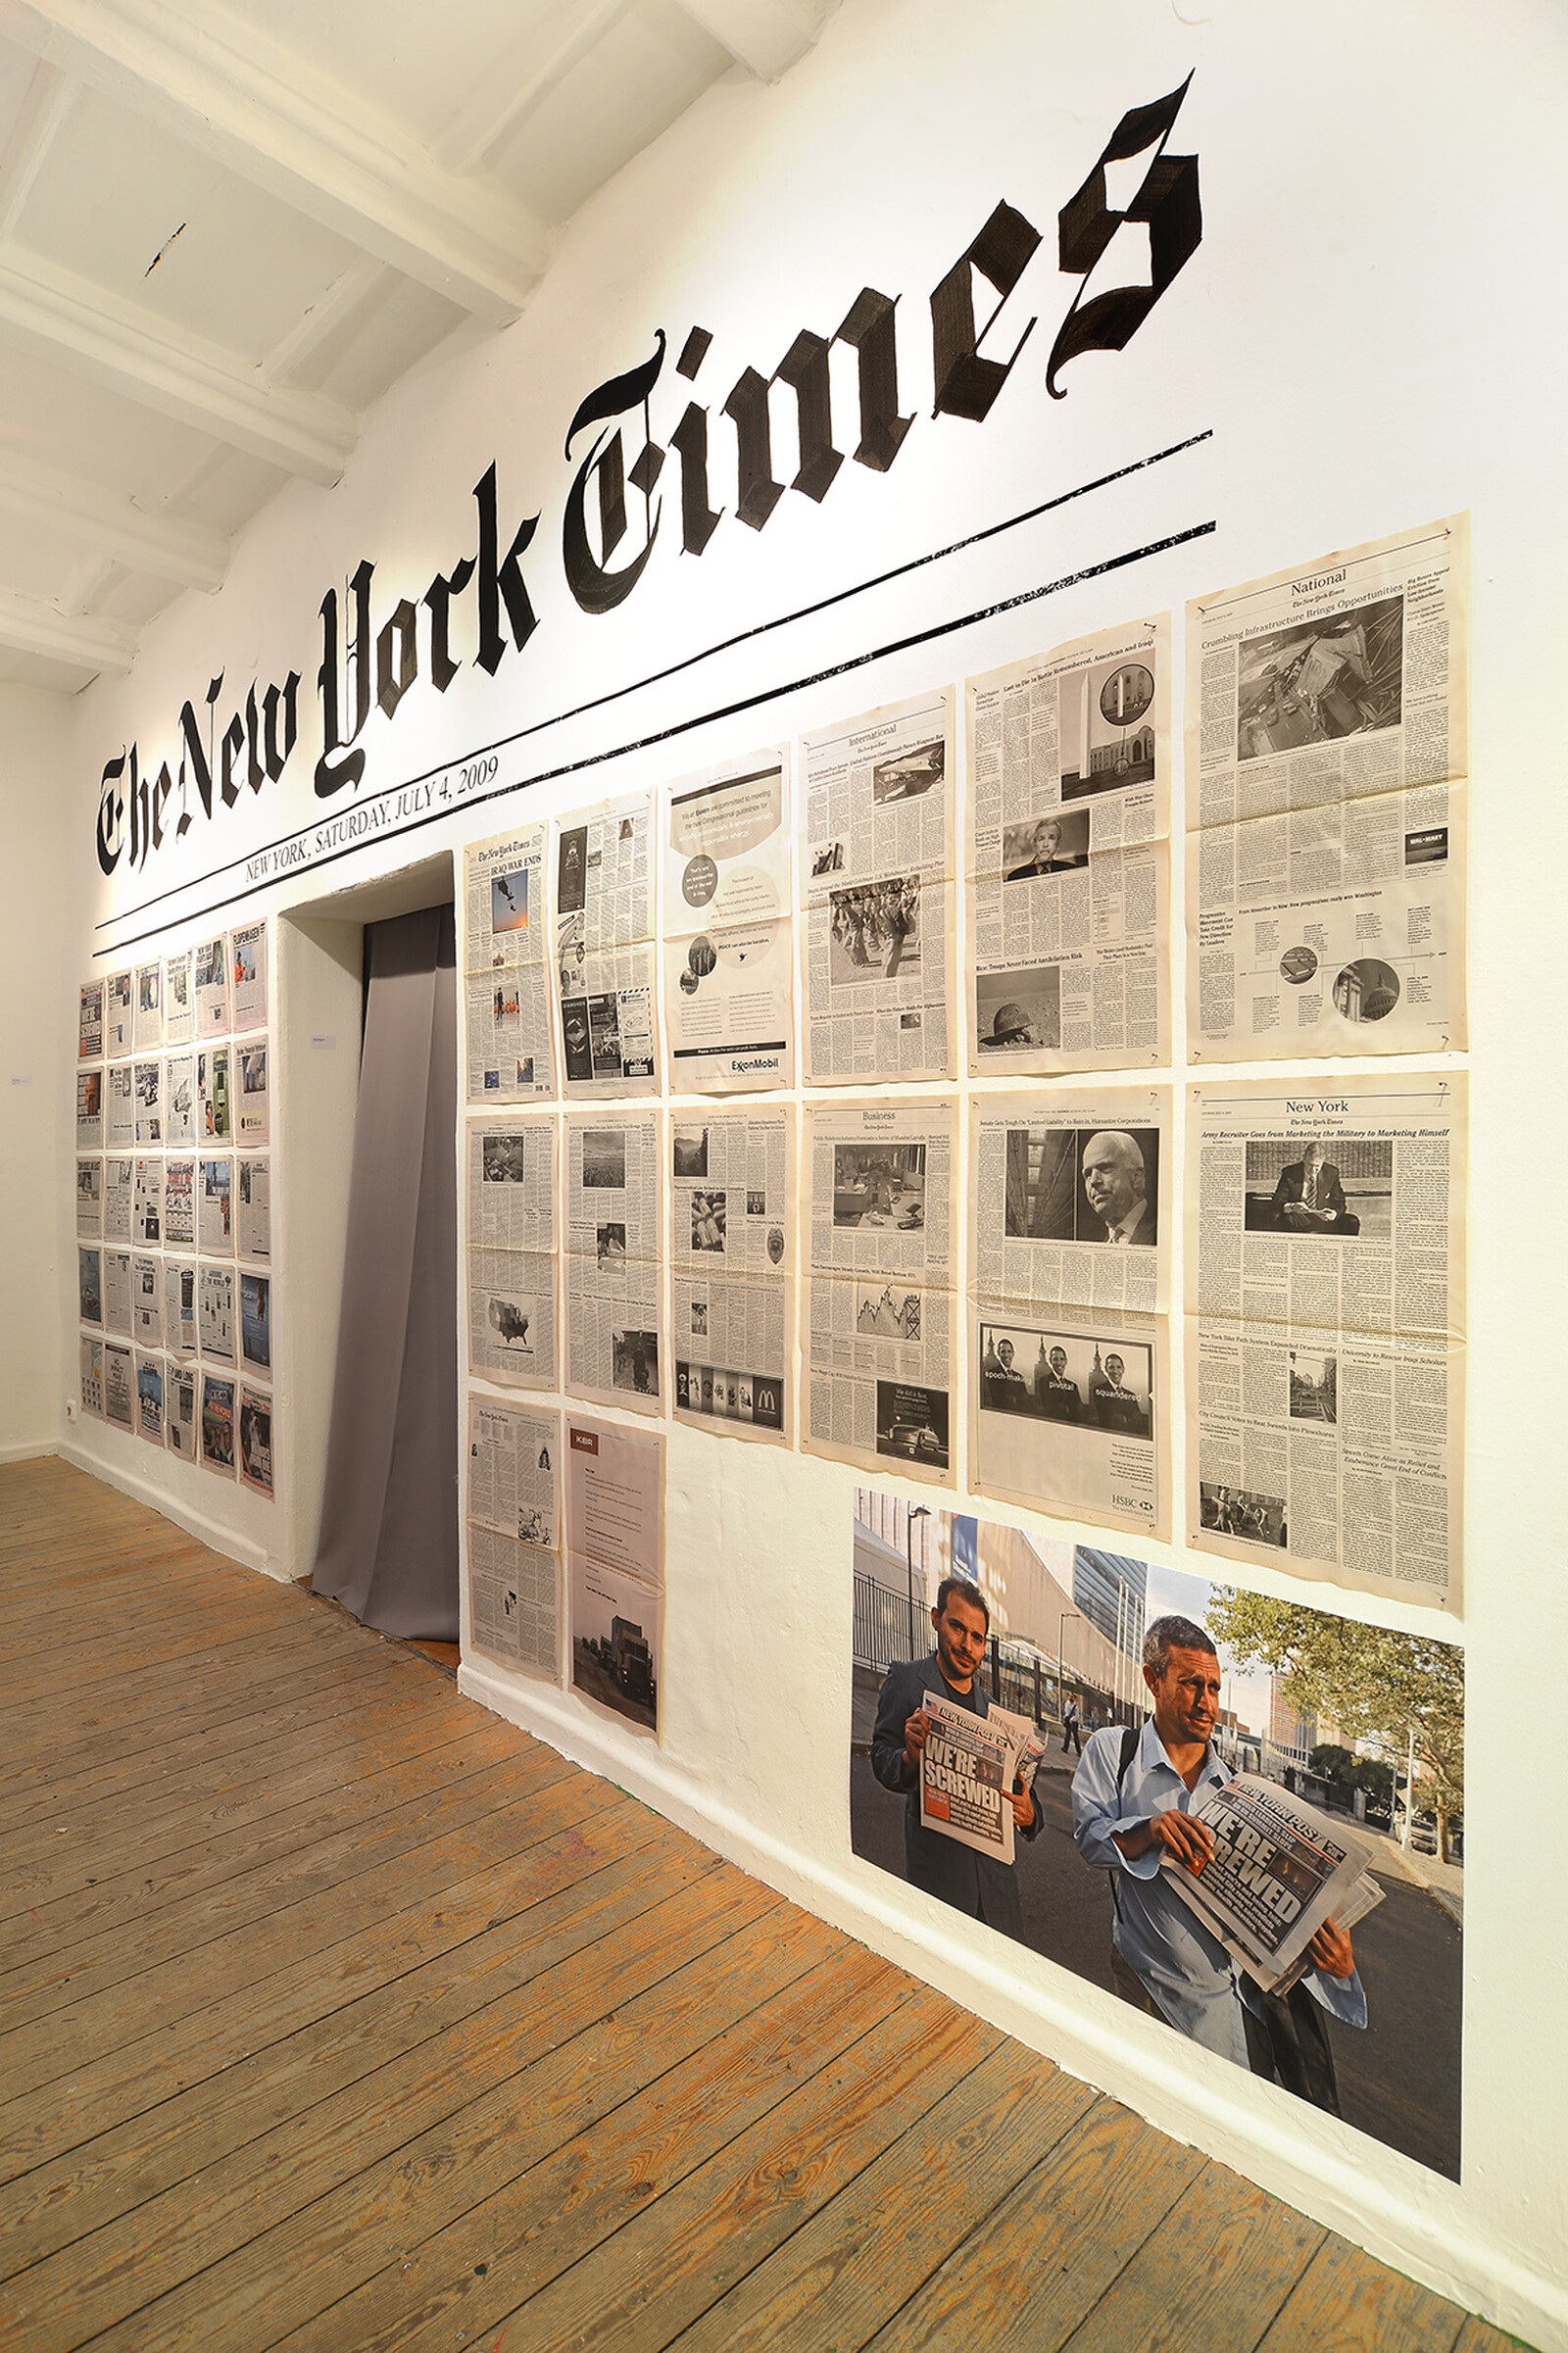 The Yes Men "Fake New York Time & New York Post", 2009, Claus Bach